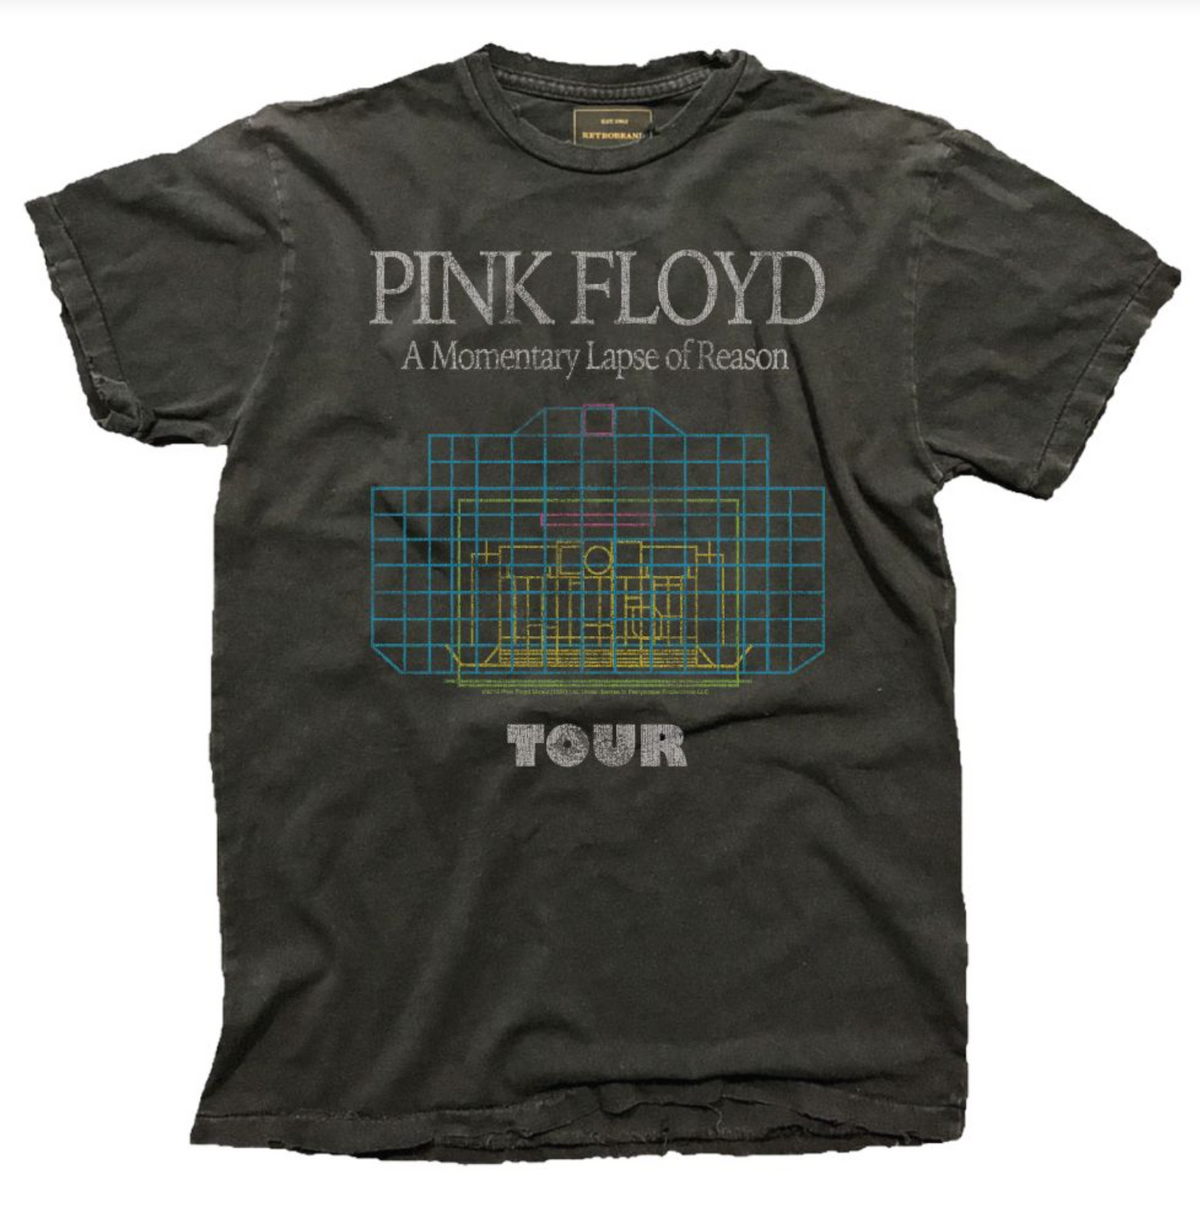 Pink Floyd "A Momentary Lapse of Reason Tour" Black Label Tee